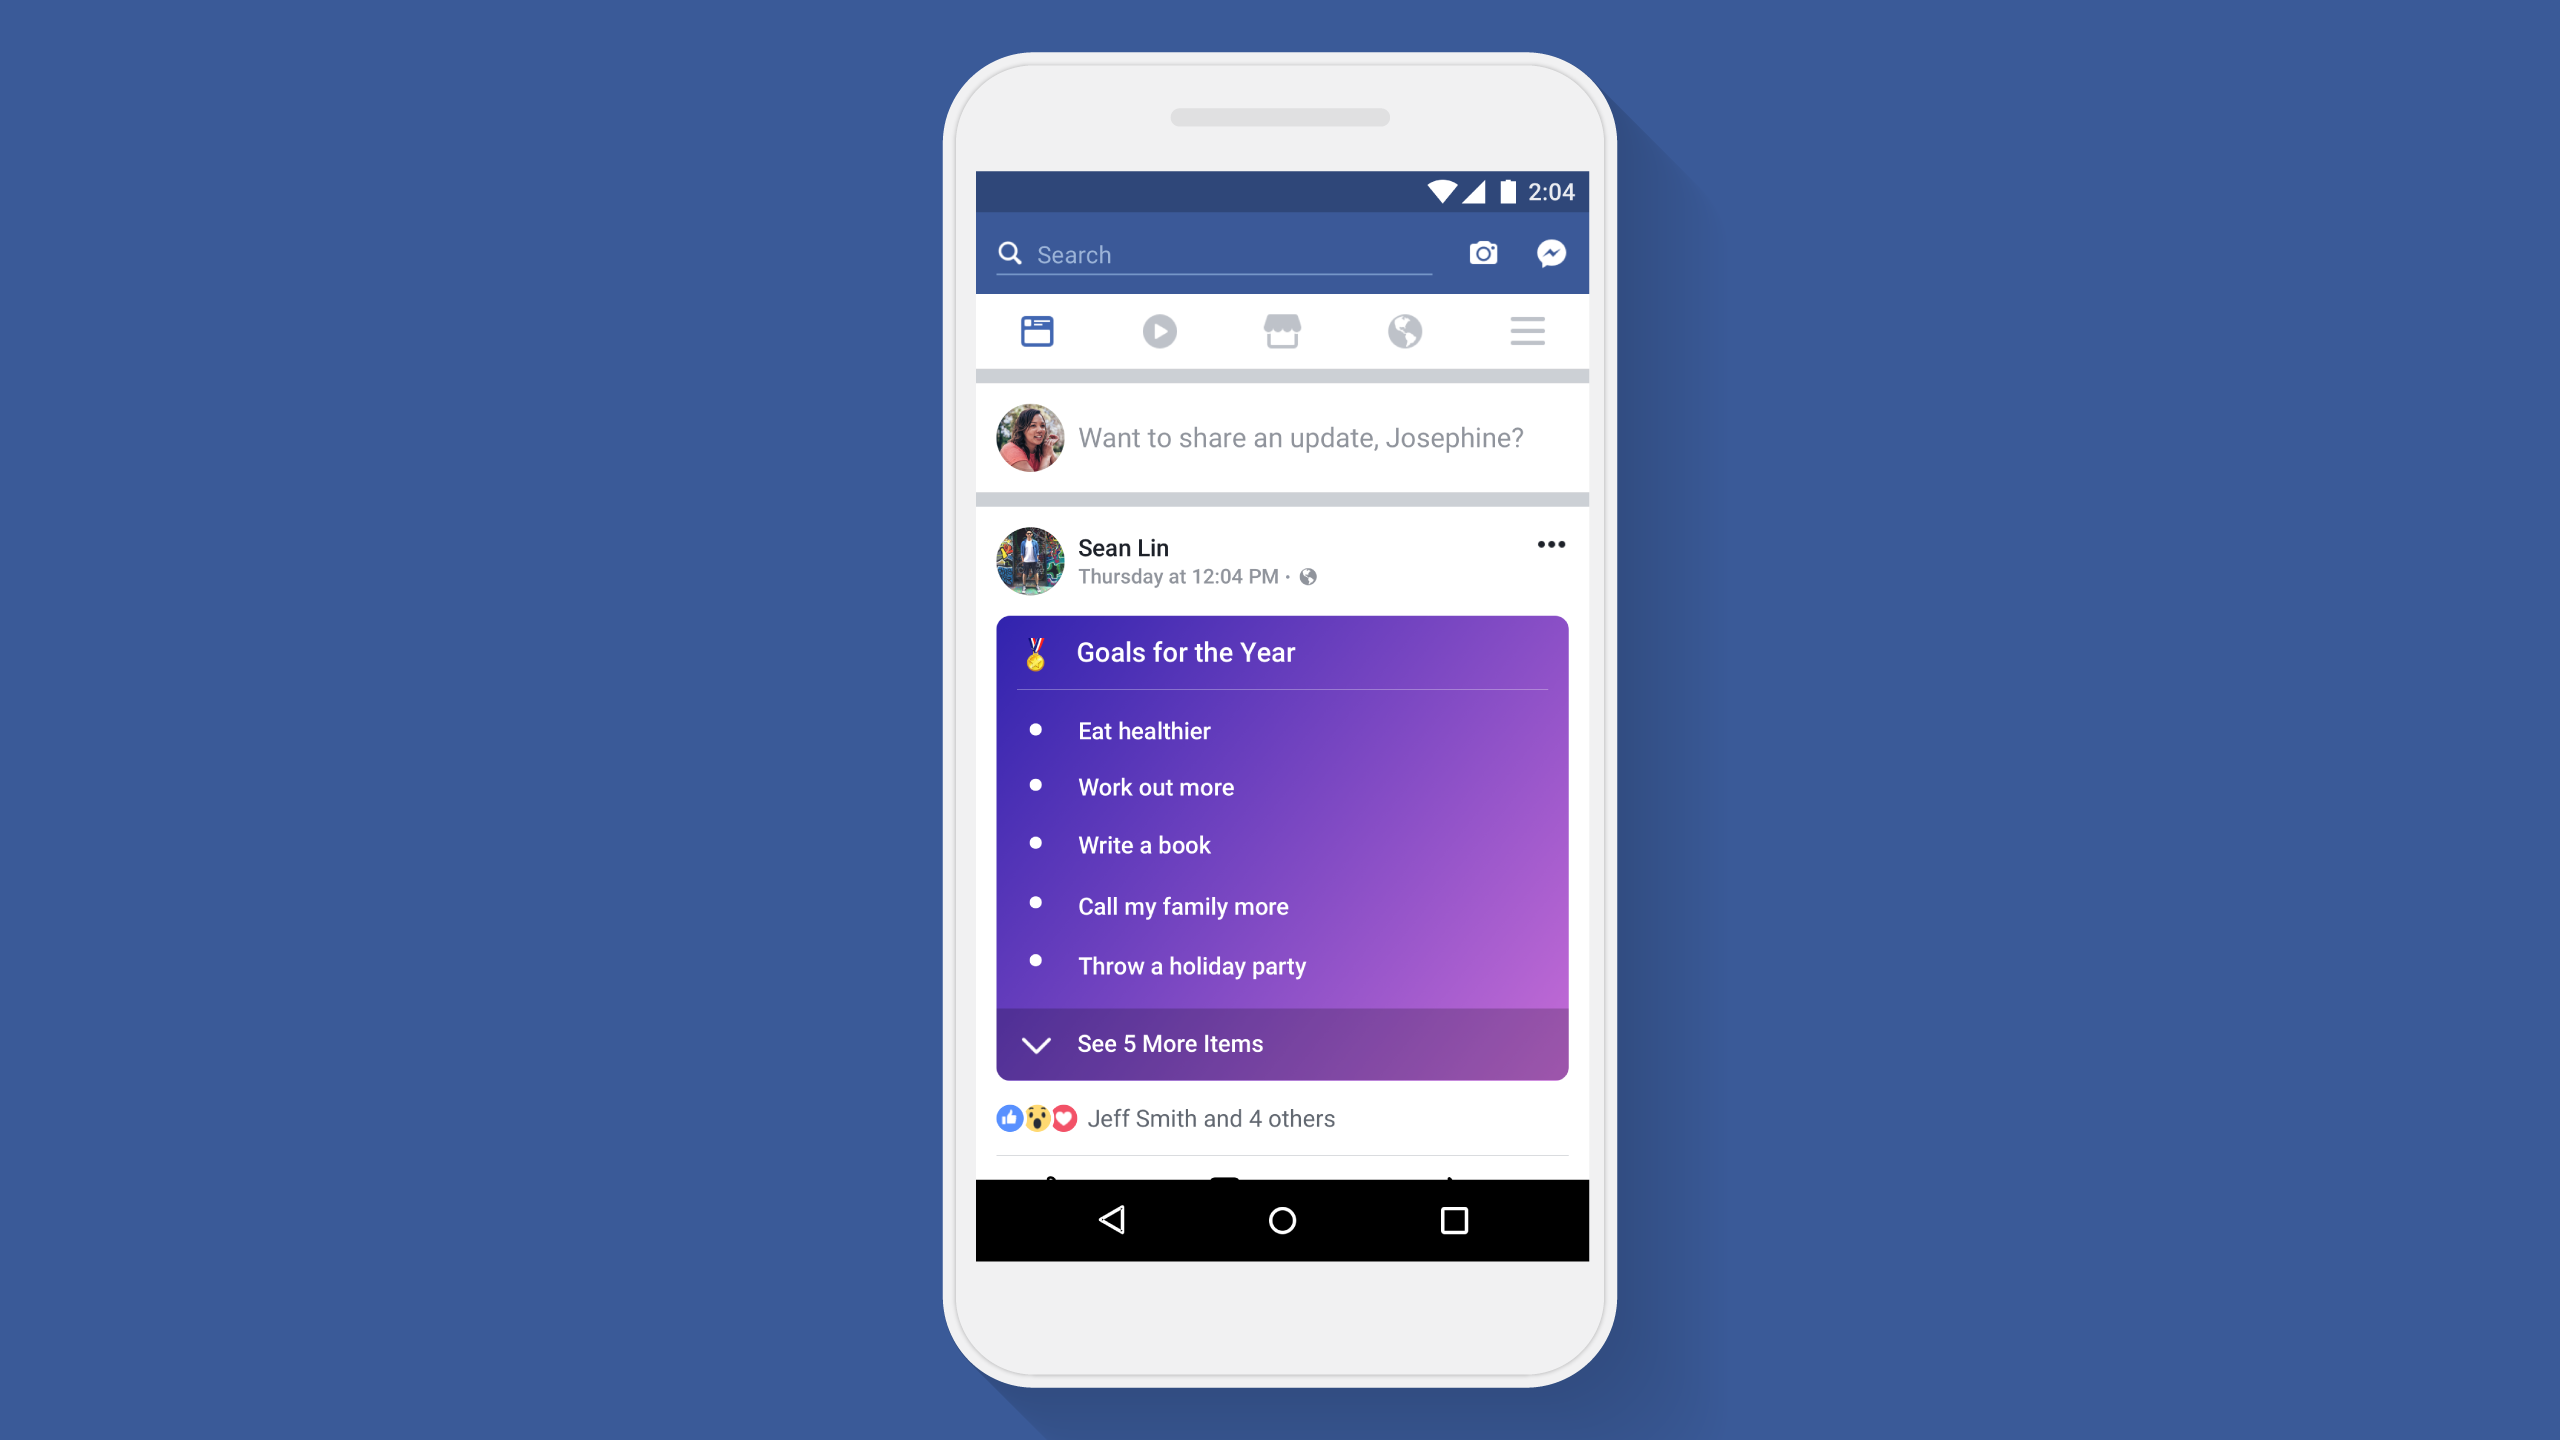 Facebook pushes for more personal updates with launch of new Lists feature